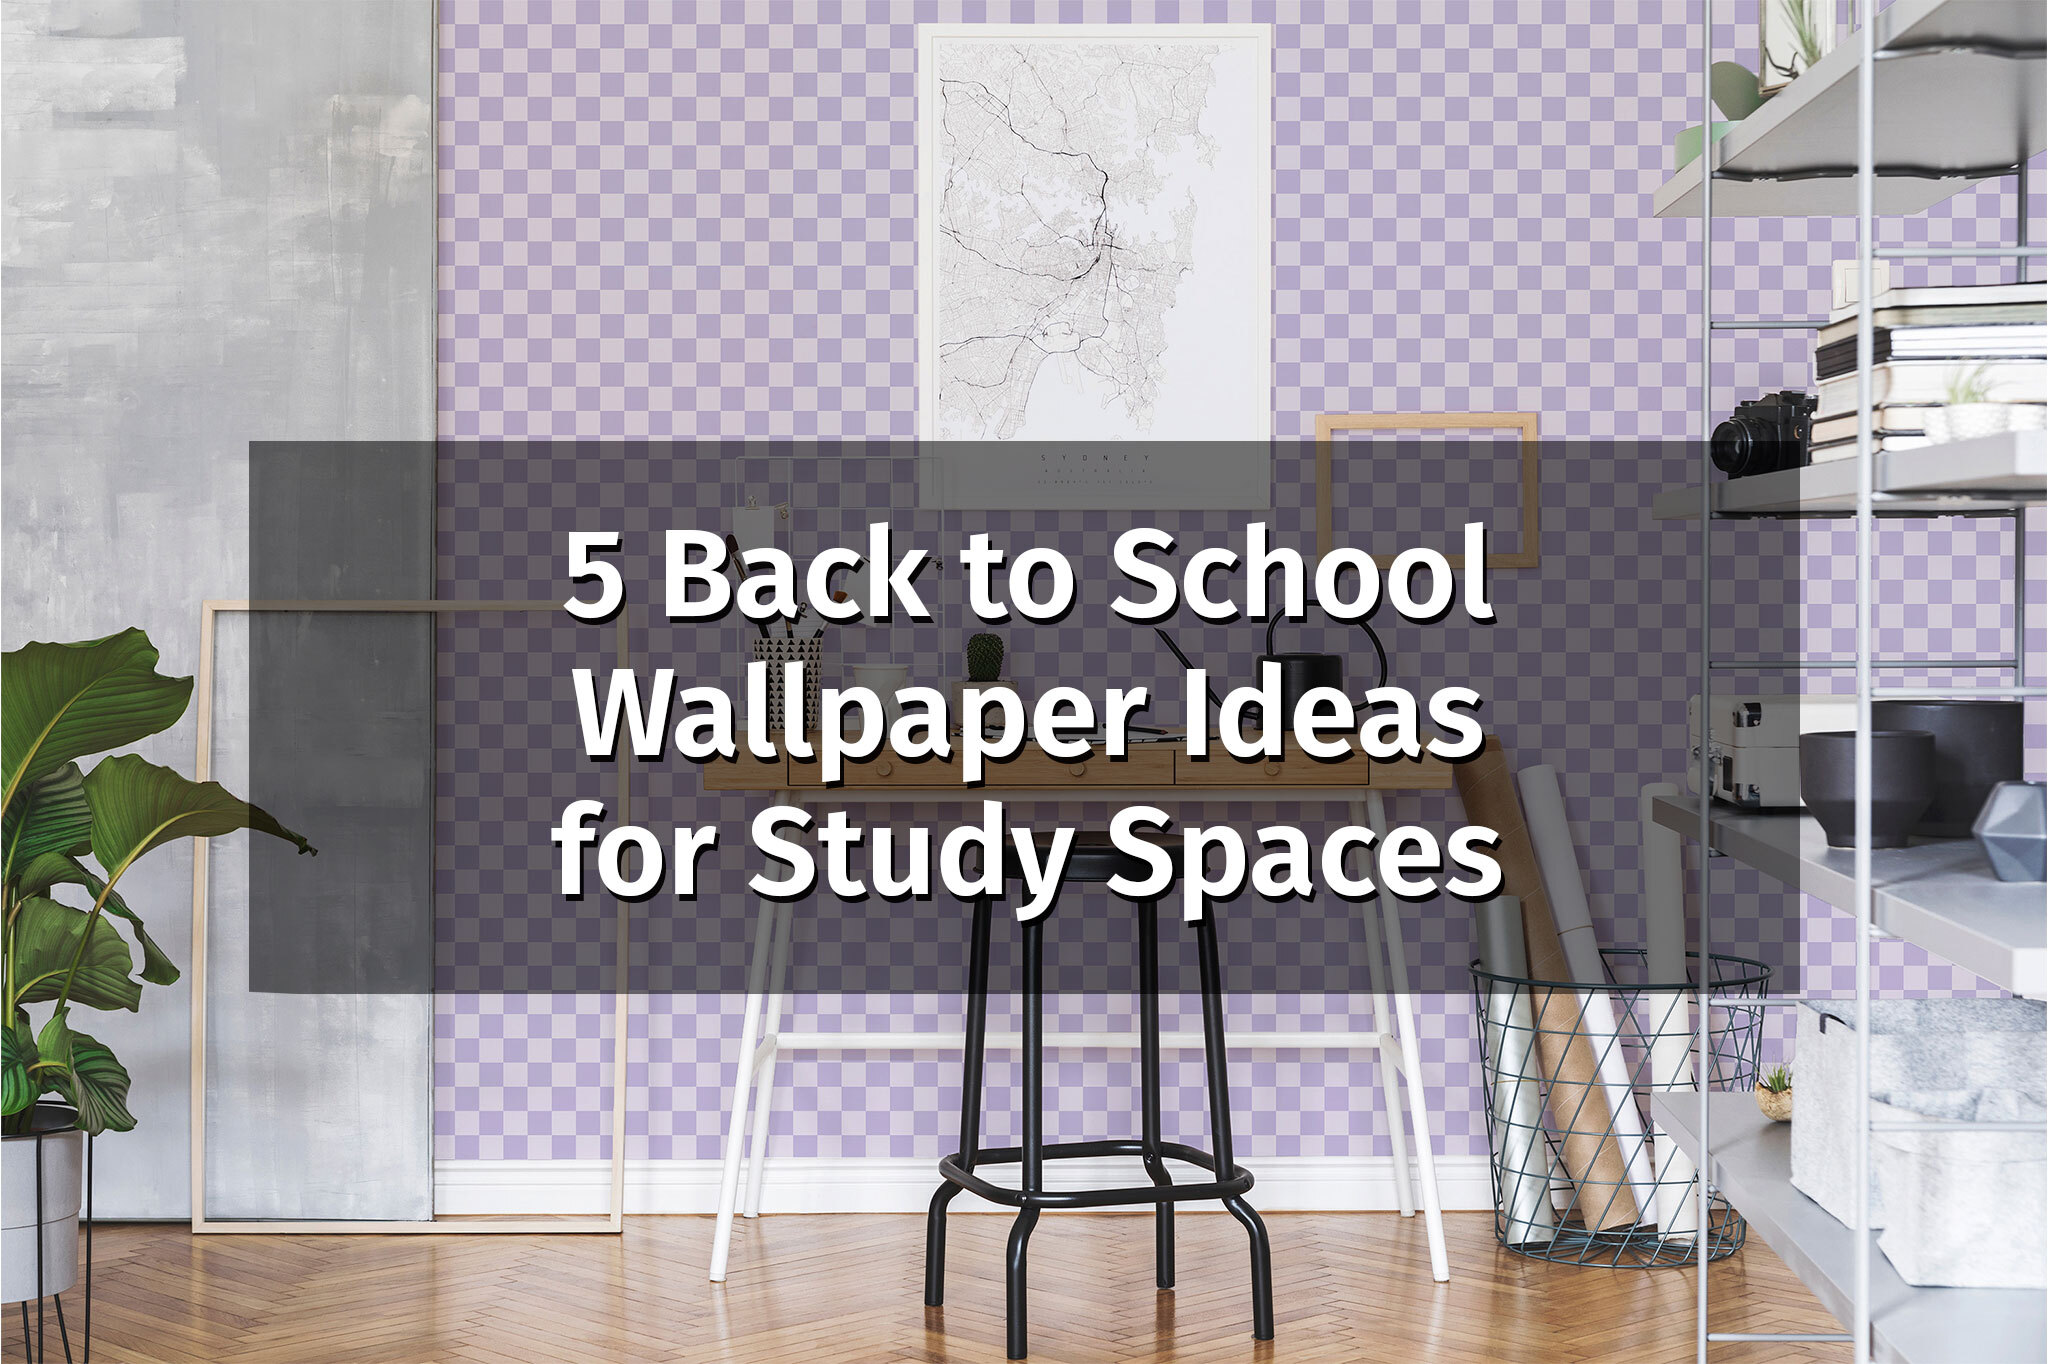 Back to school dorm room wallpaper ideas - peel and stick wallpaper ideas for study space